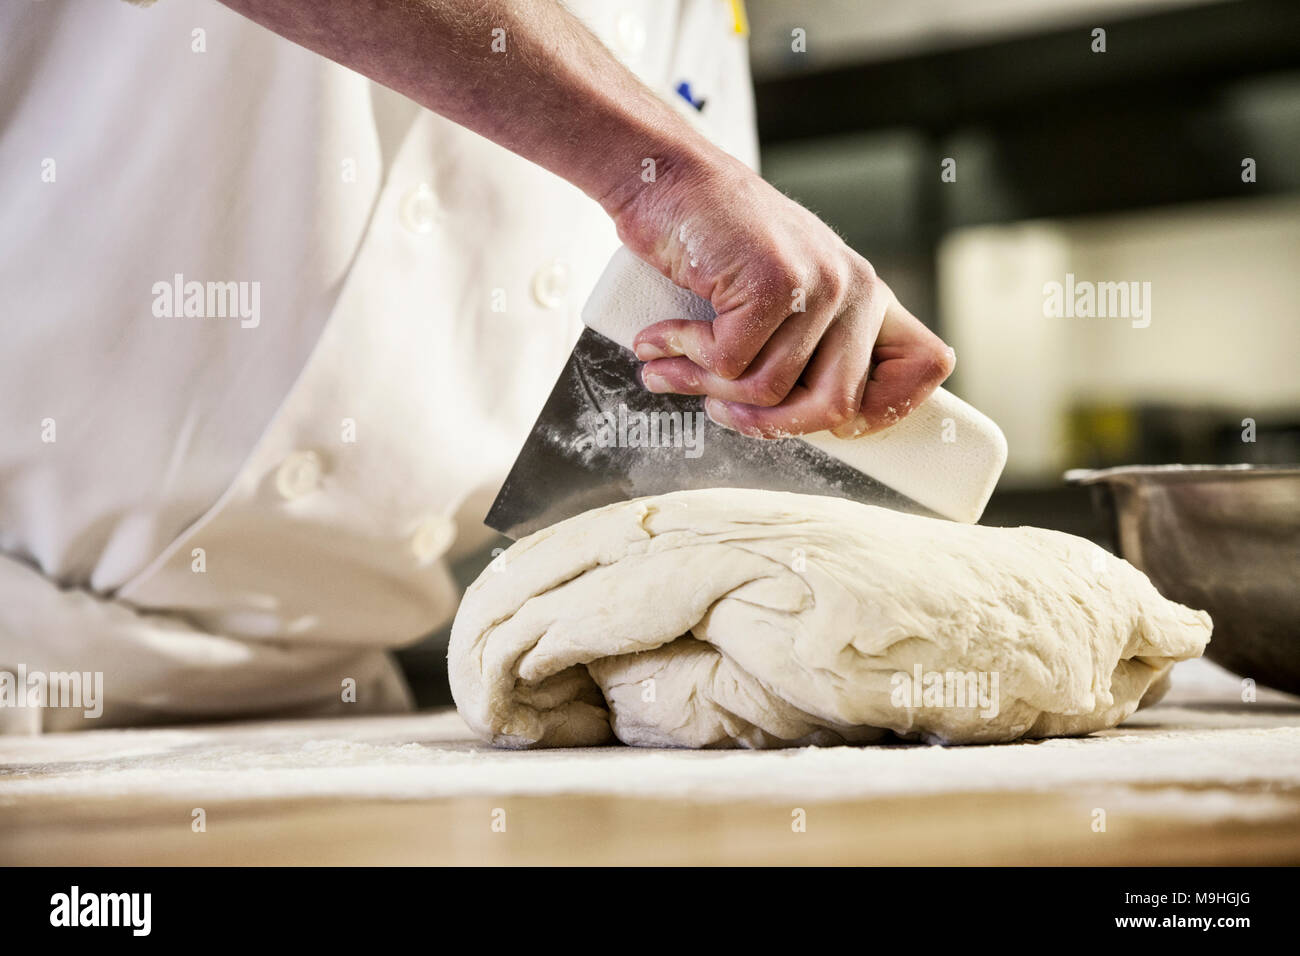 A chef dividing up bread dough into sections on a floured worktop. Stock Photo